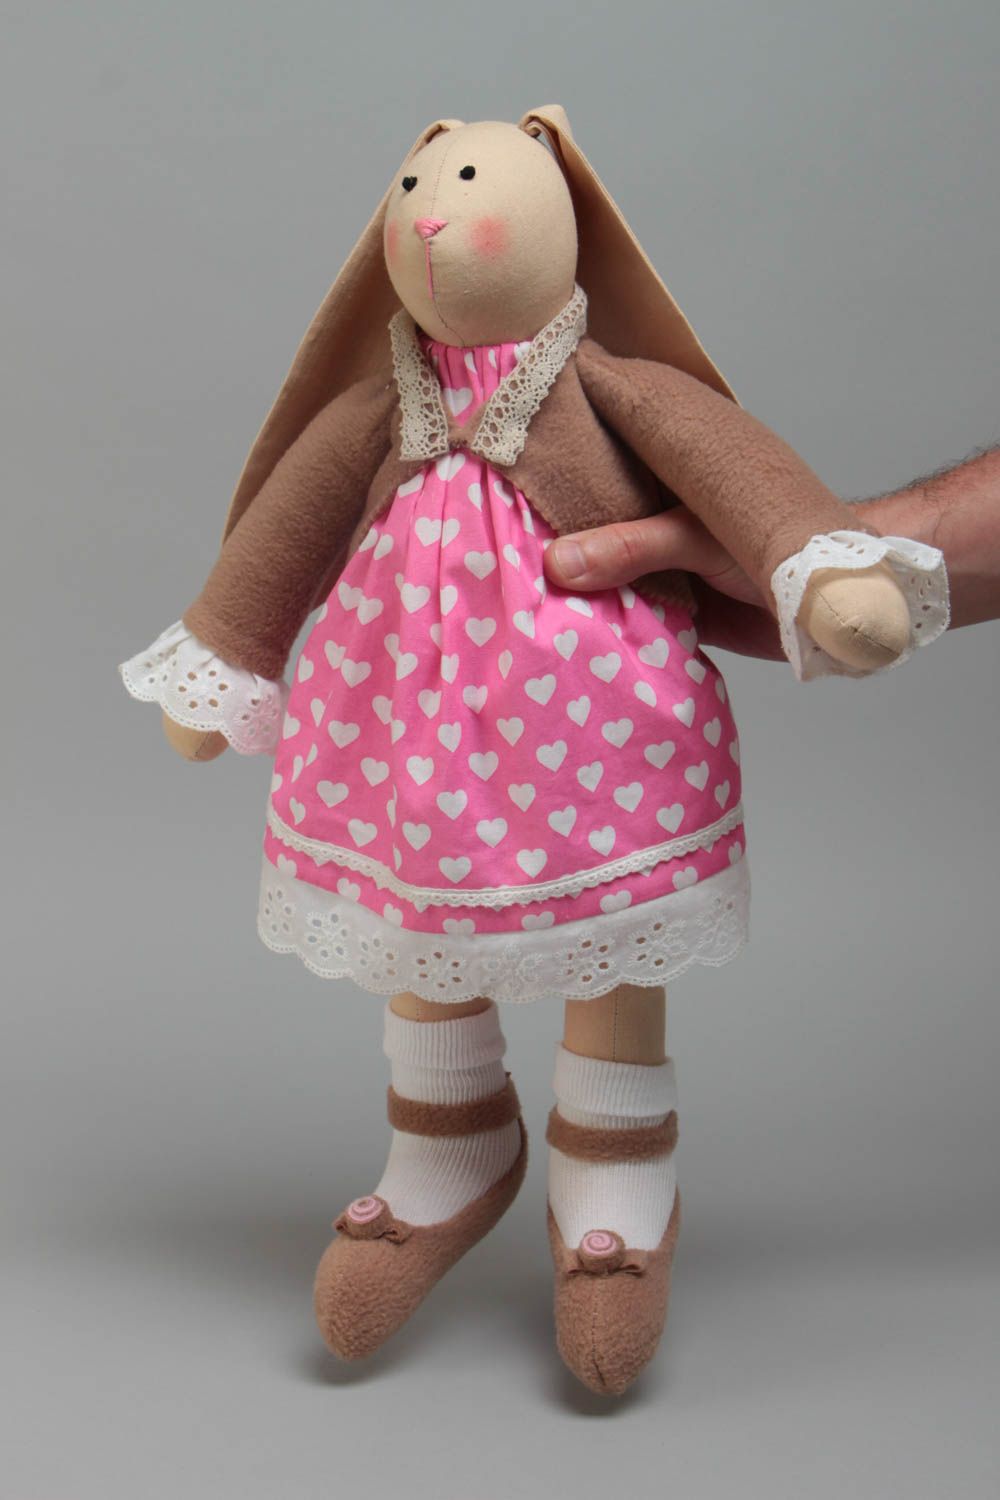 Handmade designer soft toy rabbit girl in pink dress with white hearts pattern photo 5